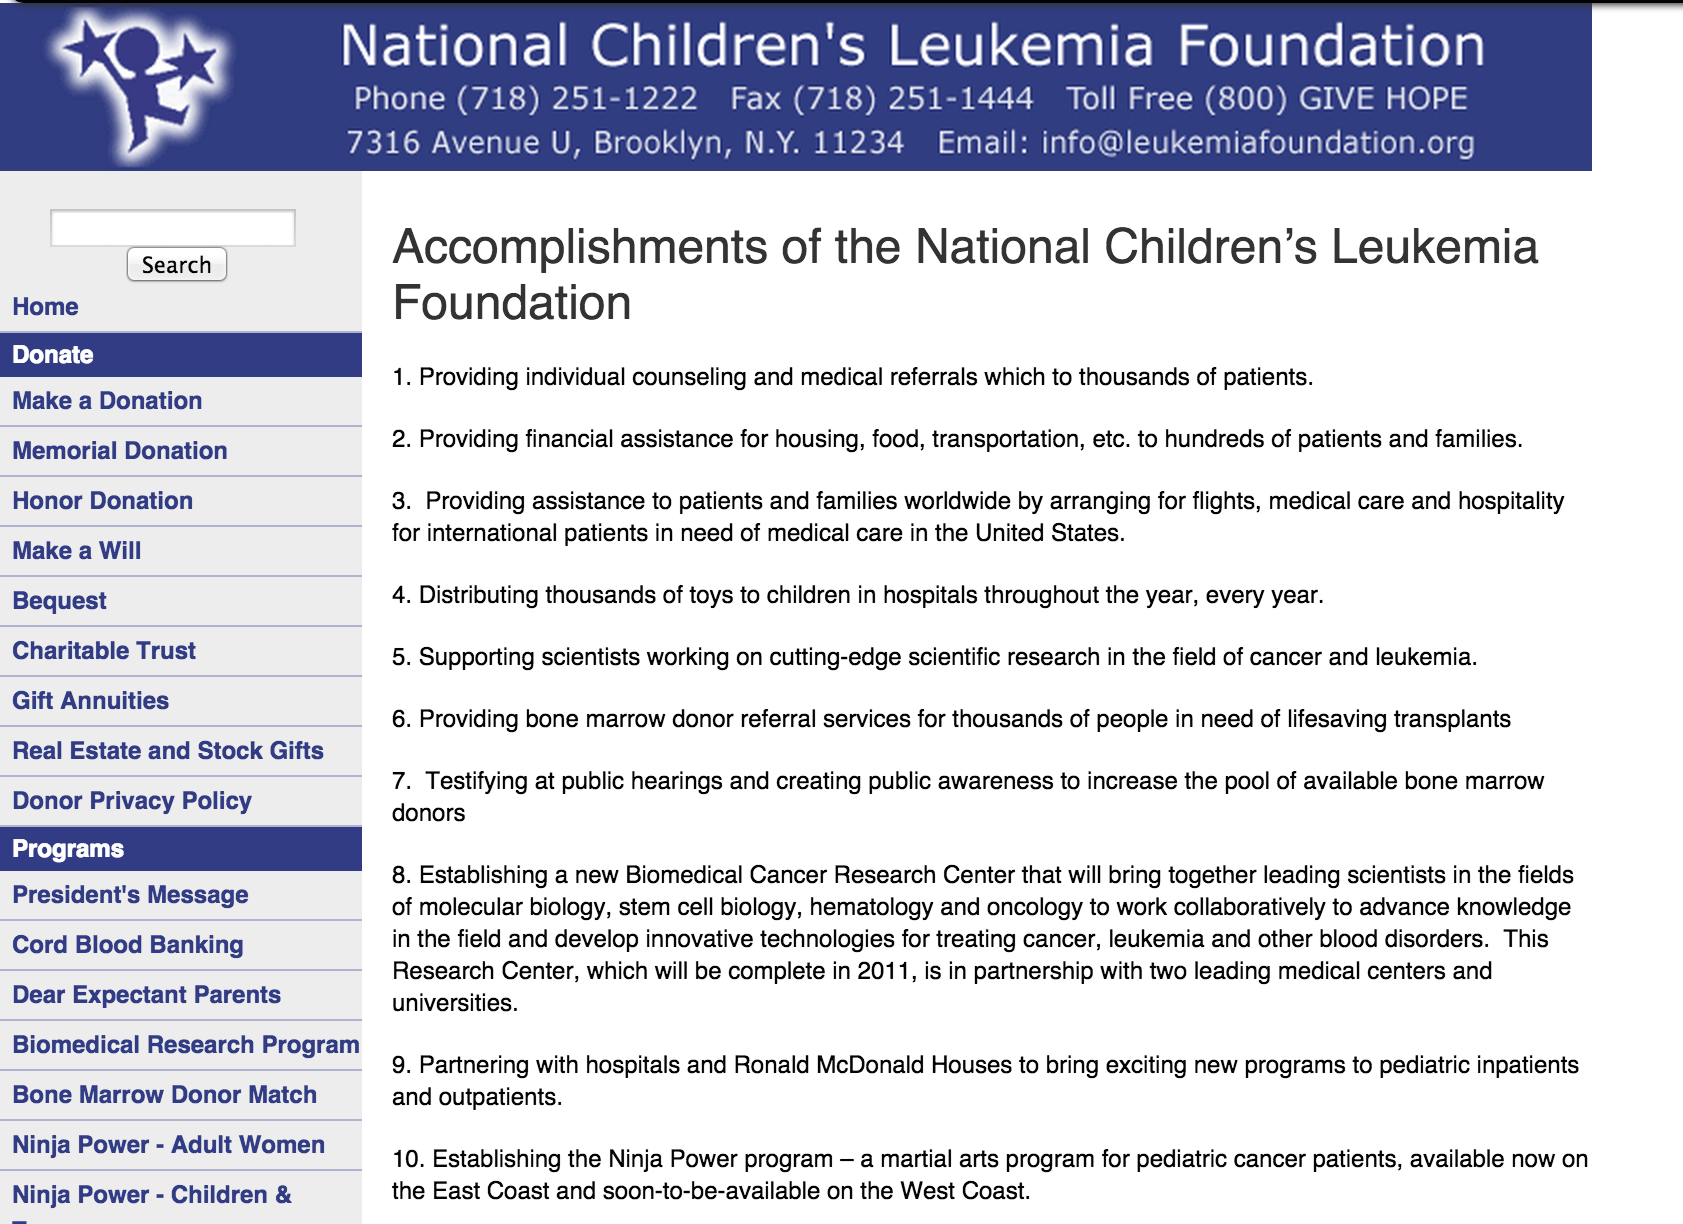 This archived page from the NCLF website shows the many programs and services that the Foundation claimed to operate. In reality, claims the state, the group was doing little to nothing to help fight leukemia.